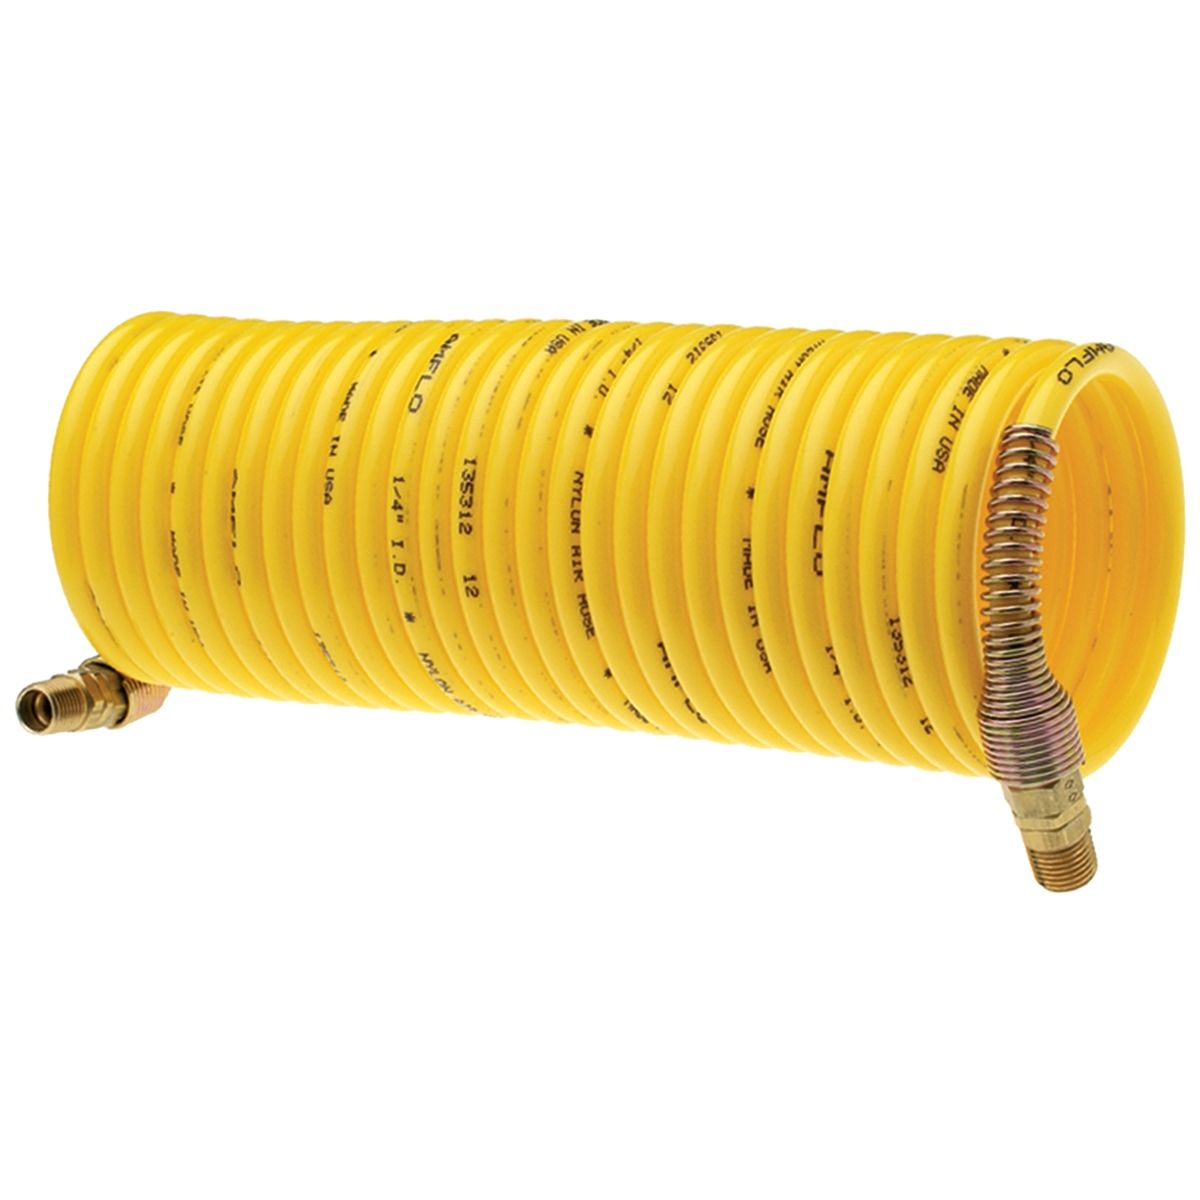 Yellow Recoil Hose 1/4 Inch Dia 1/4 Inch NPTM, 25 Ft Length